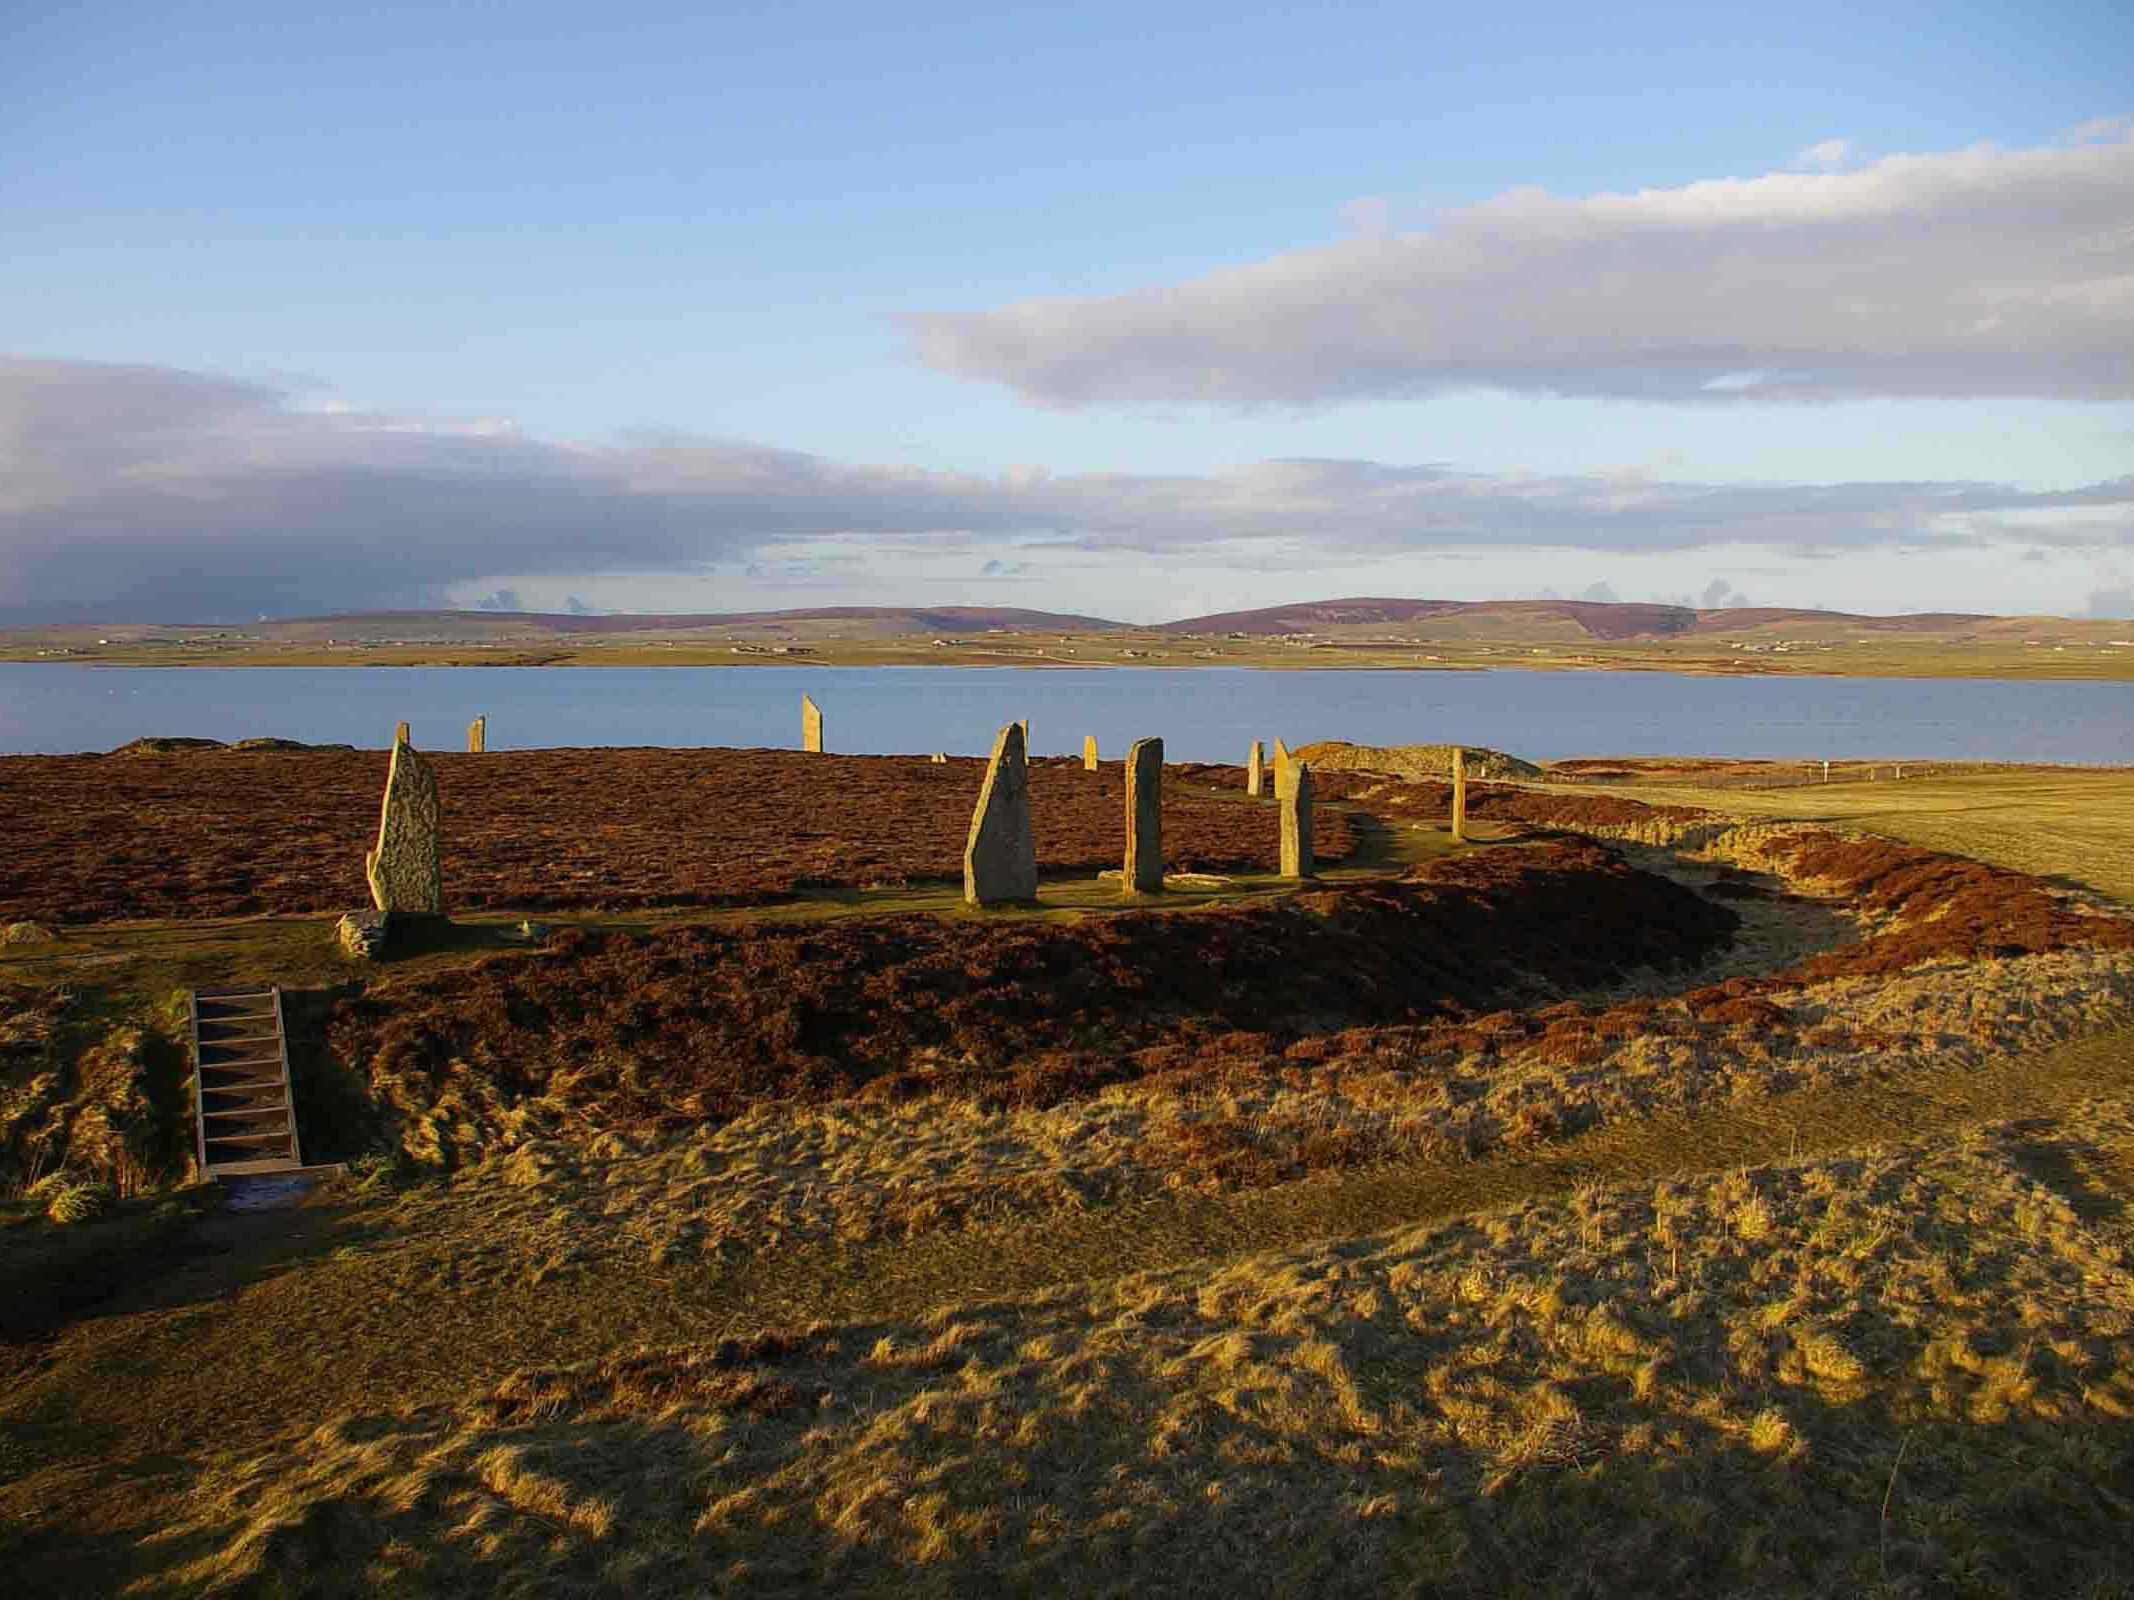 The Ring of Brodgar originally had 60 stones, but now has 27